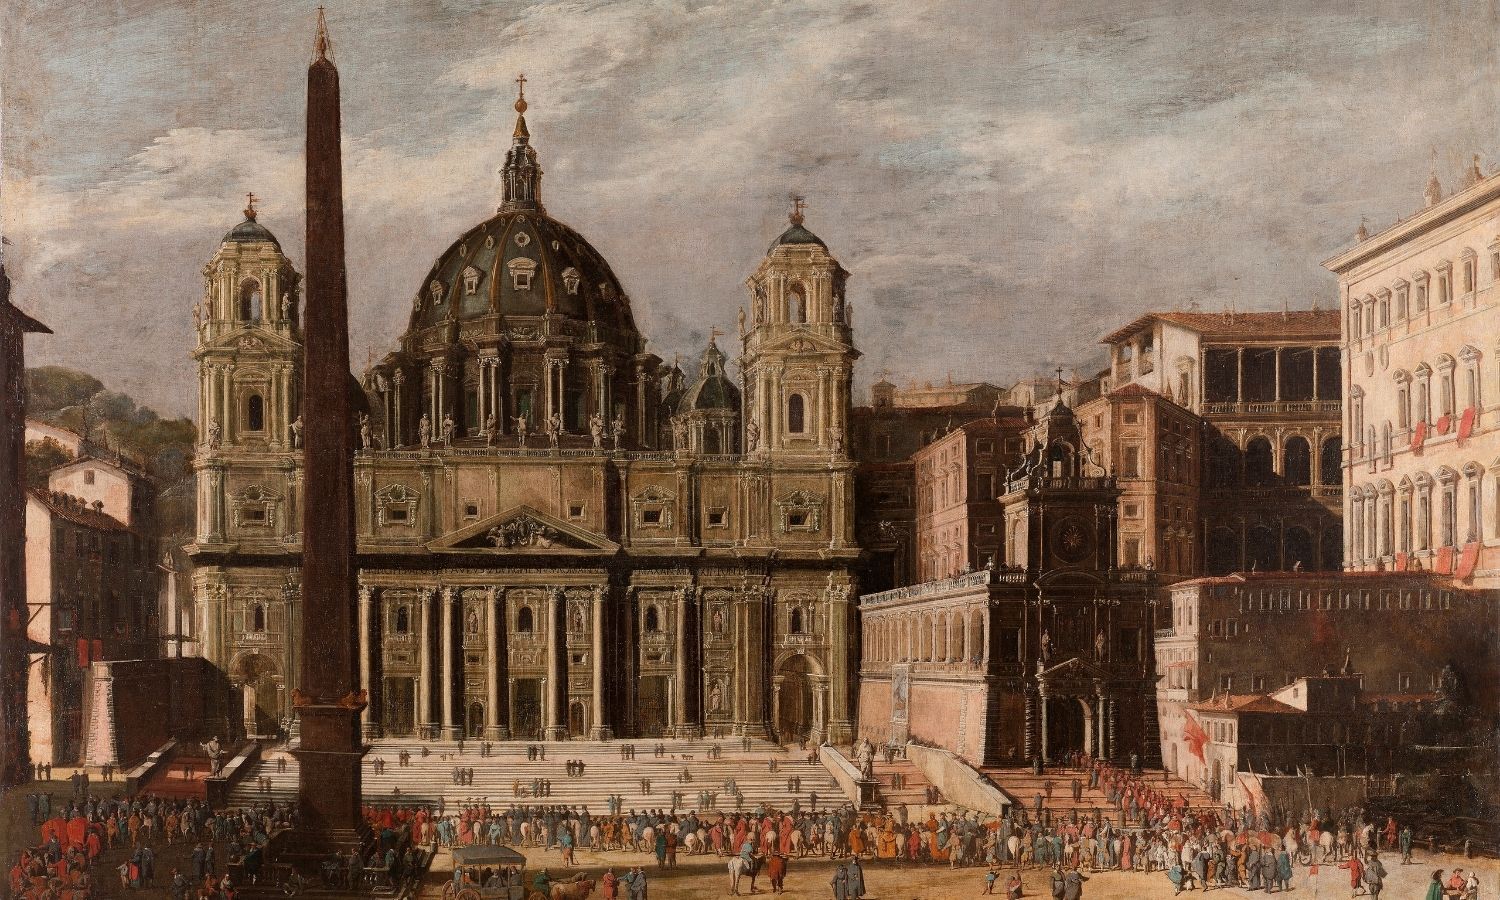 OTD in 1626: St. Peter's Basilica in The Vatican City was consecrated on this day